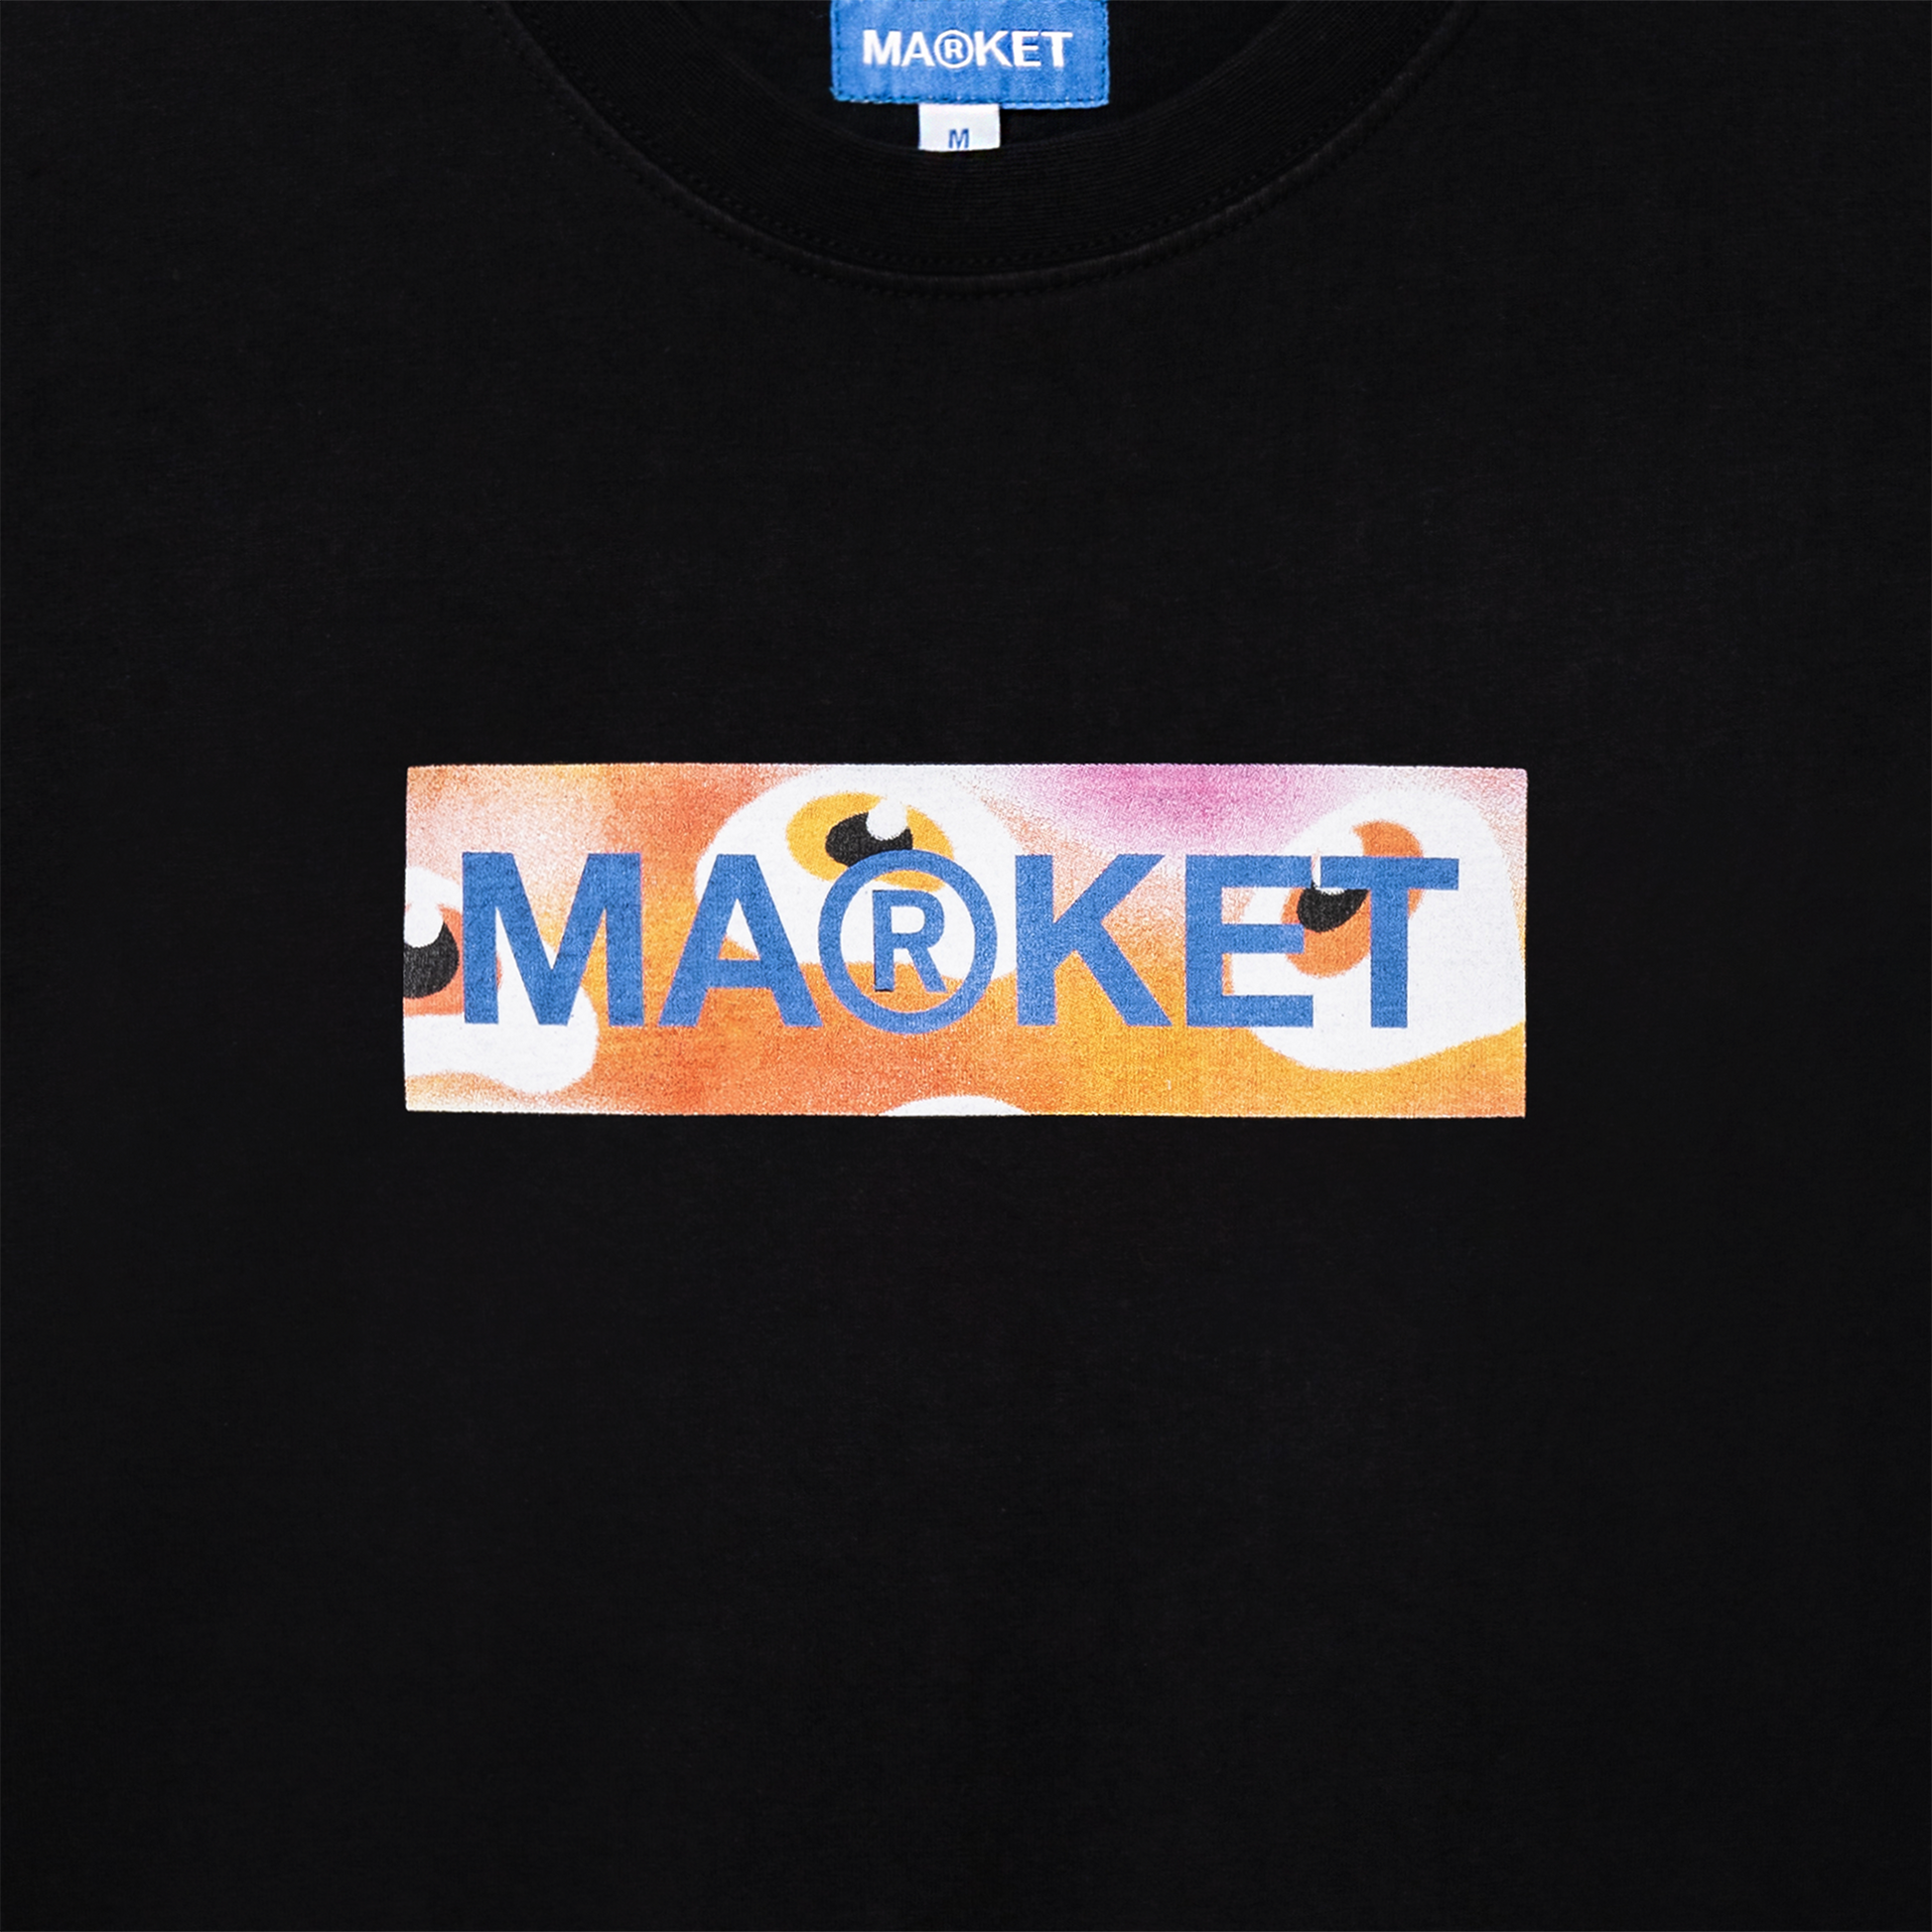 MARKET clothing brand MARKET BAR LOGO T-SHIRT. Find more graphic tees, hats, hoodies and more at MarketStudios.com. Formally Chinatown Market.